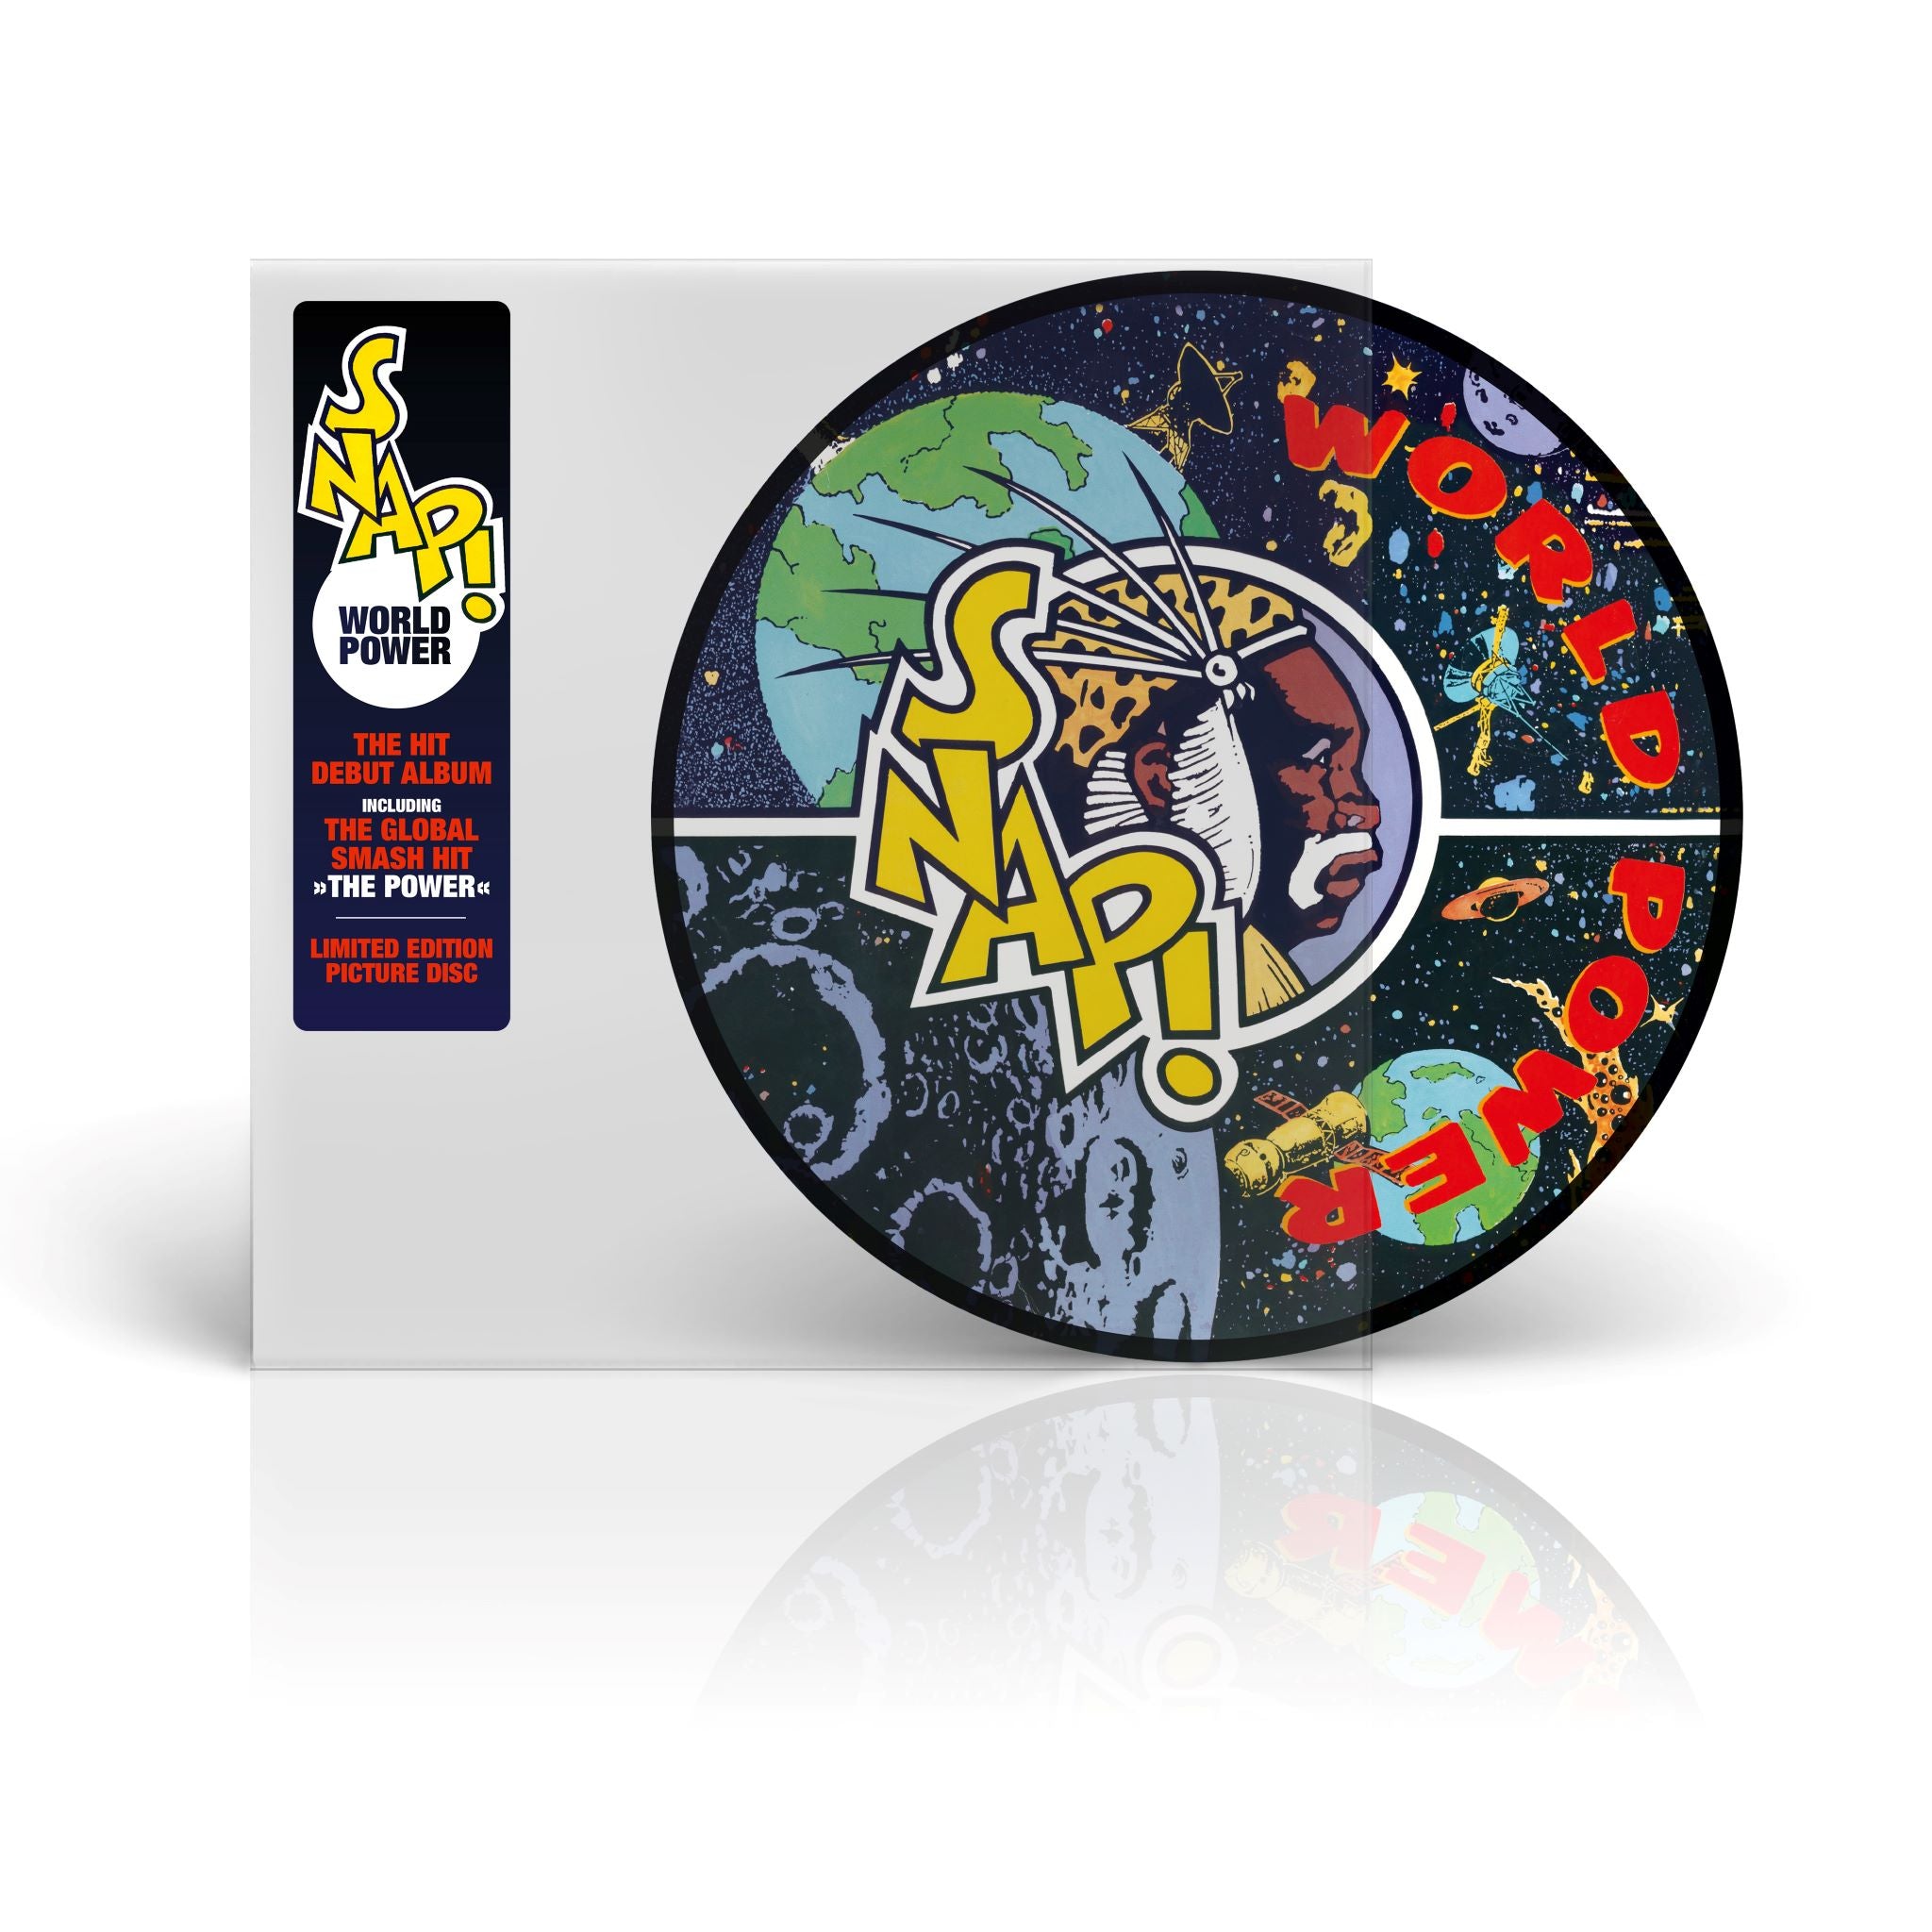 Snap! - World Power: Limited Edition Vinyl Picture Disc LP